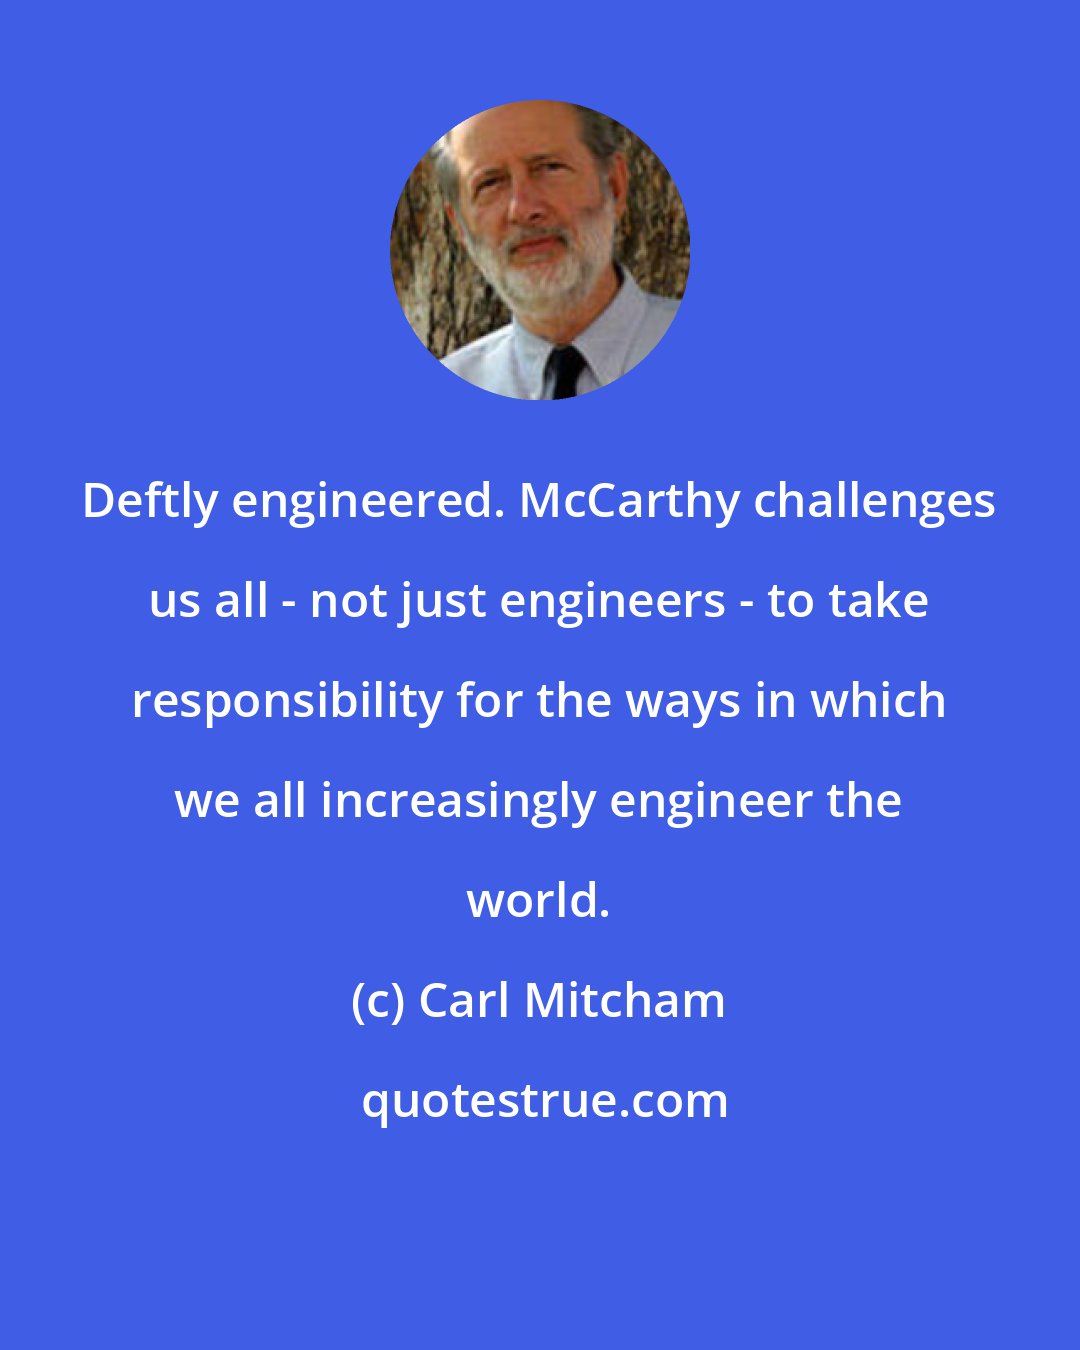 Carl Mitcham: Deftly engineered. McCarthy challenges us all - not just engineers - to take responsibility for the ways in which we all increasingly engineer the world.